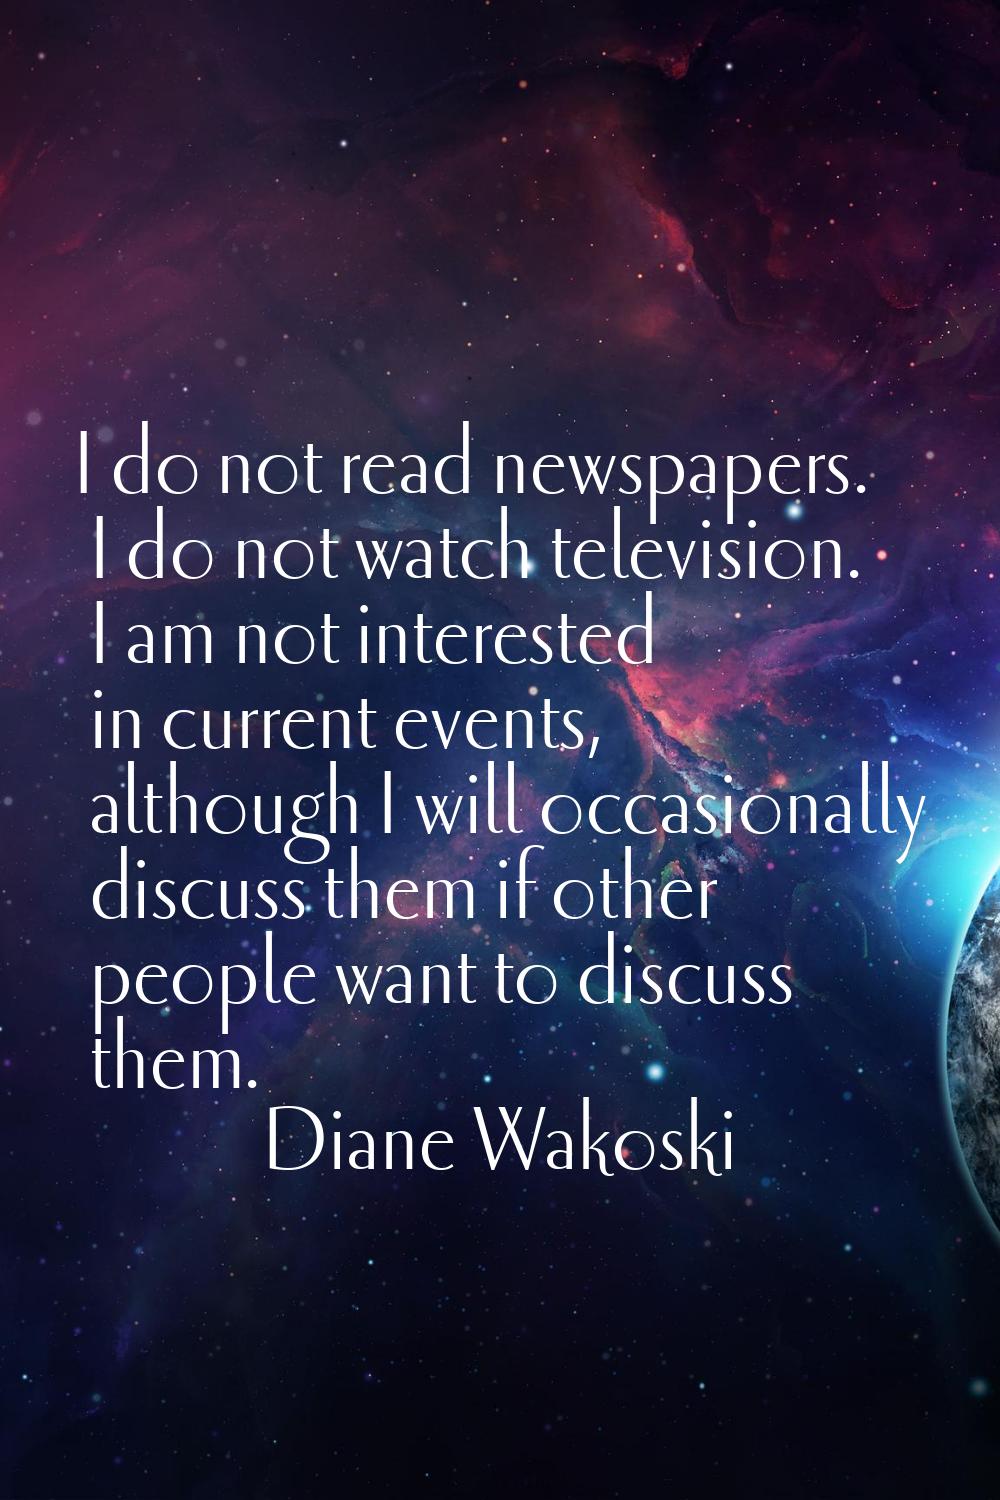 I do not read newspapers. I do not watch television. I am not interested in current events, althoug